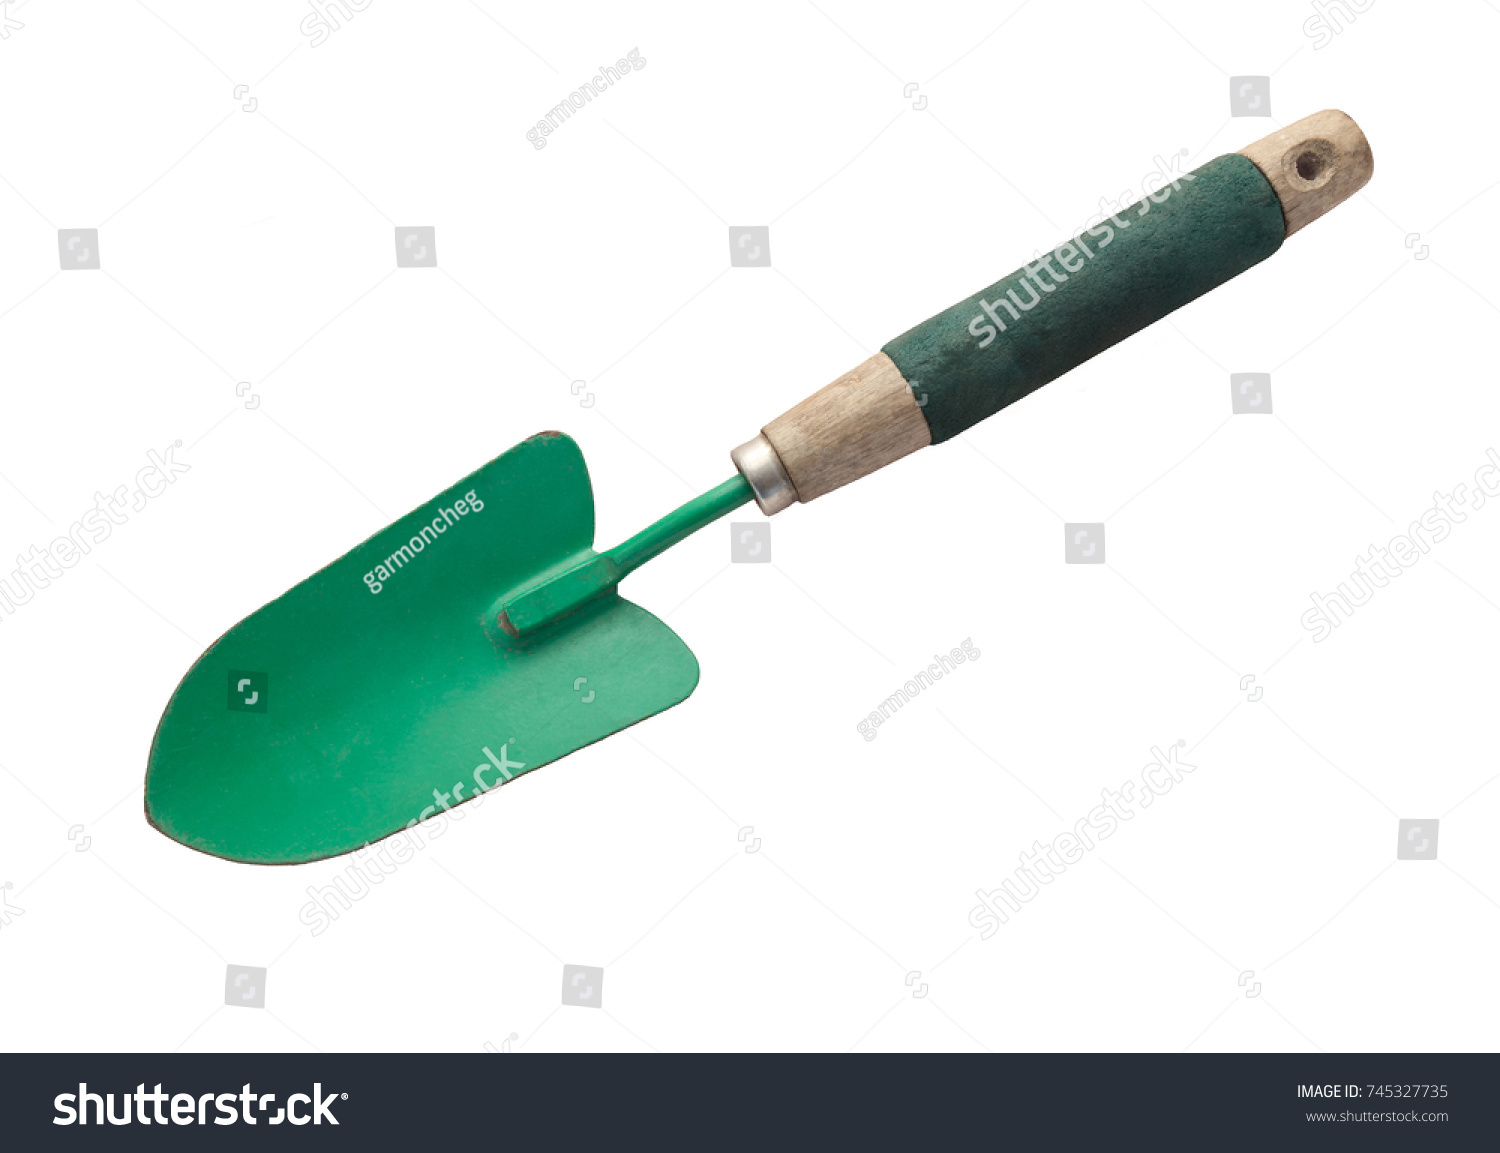 Gardening shovel cut out on a white background #745327735